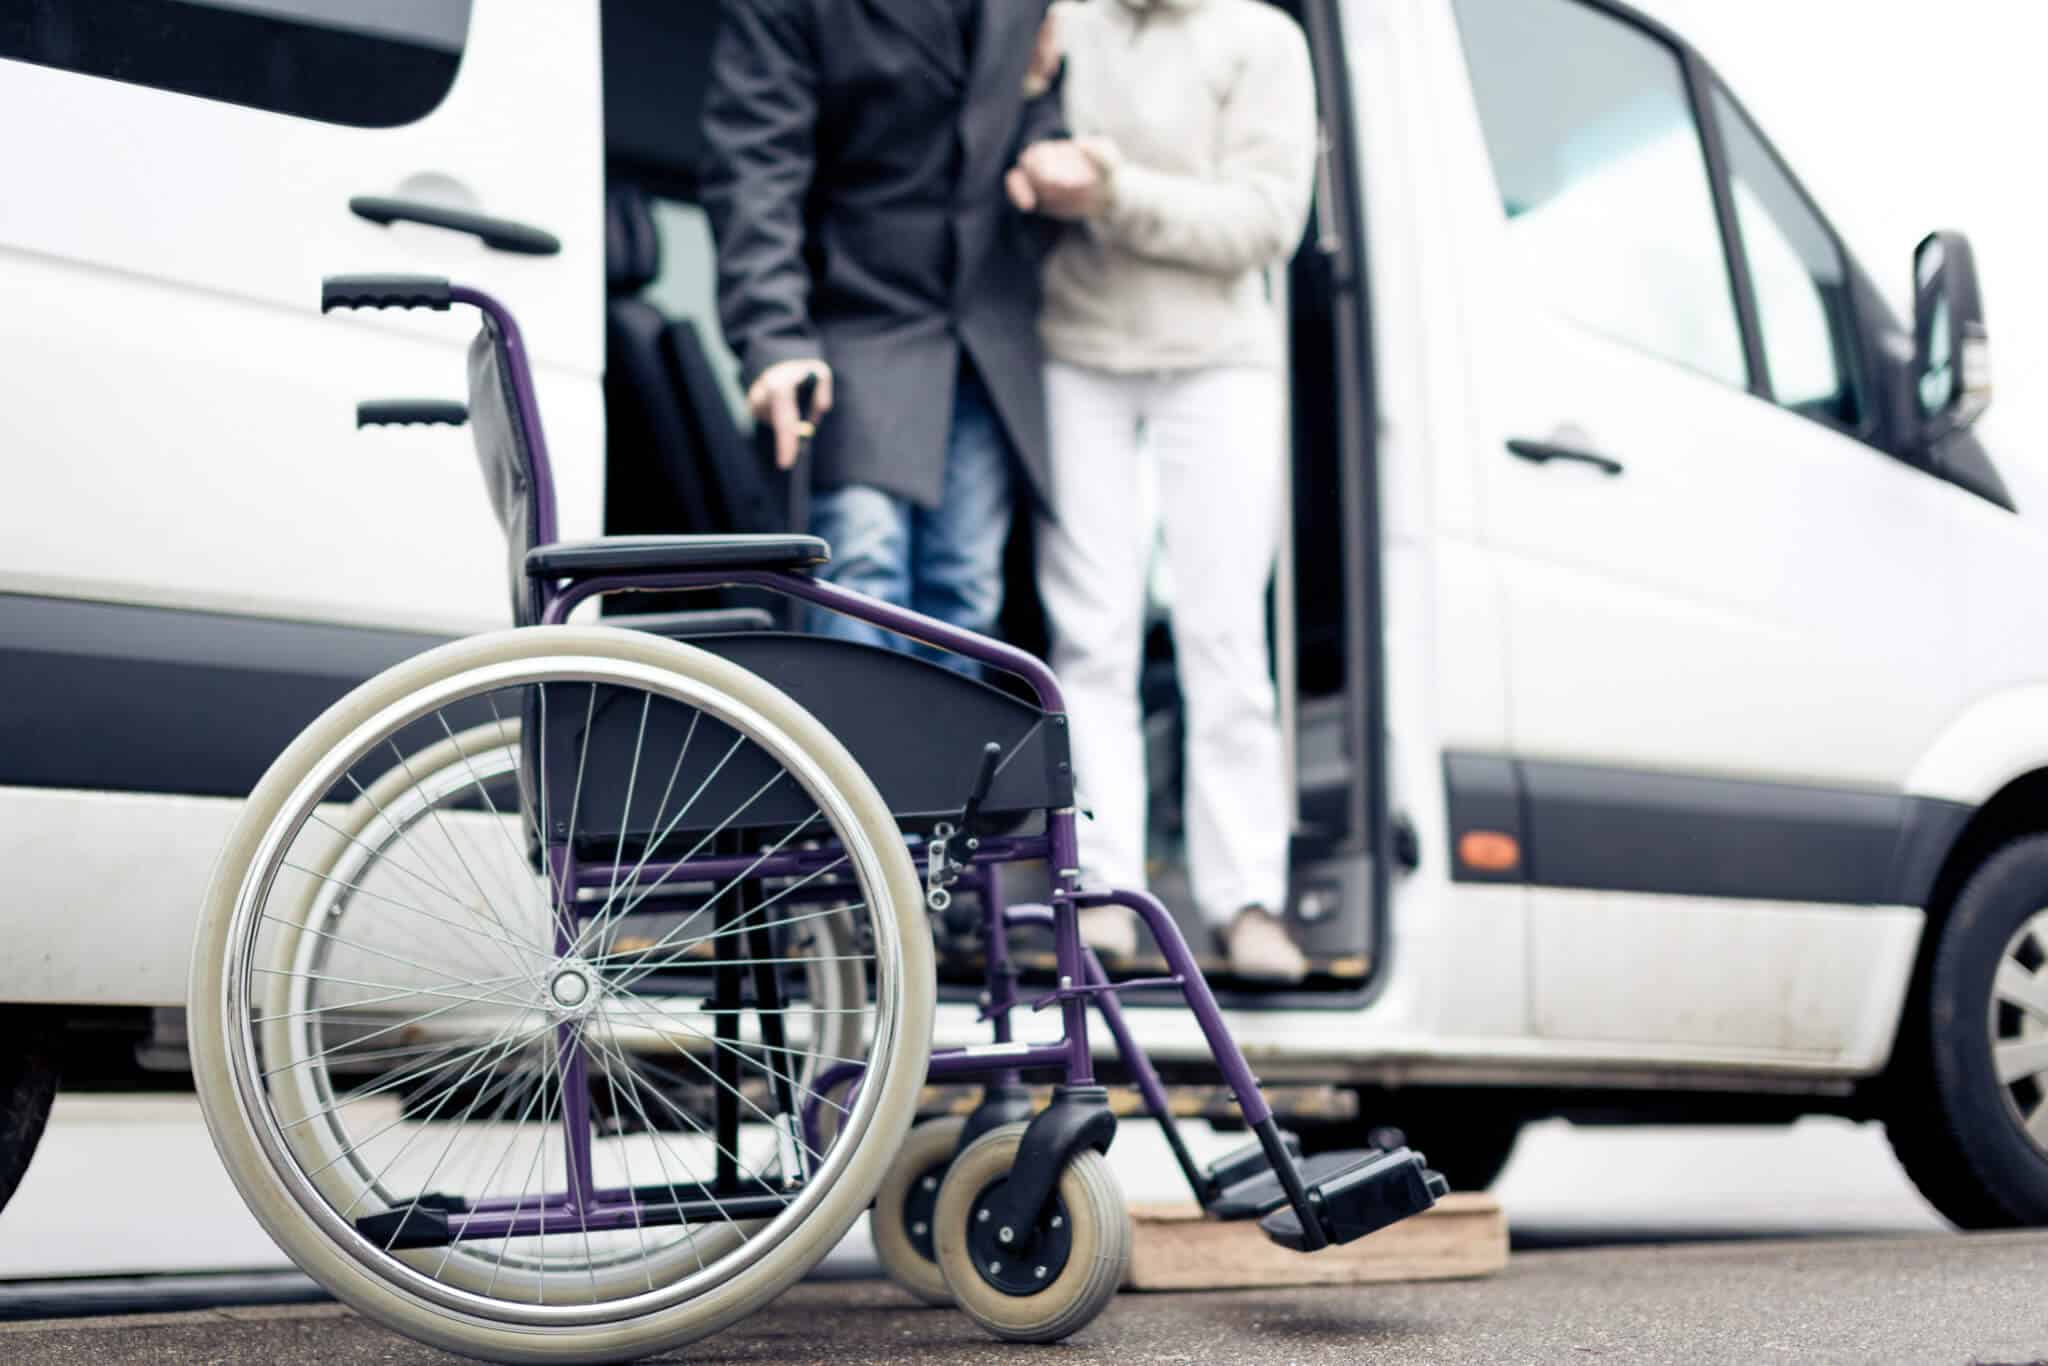 Caregiver helps senior man exit van into a wheelchair for an appointment